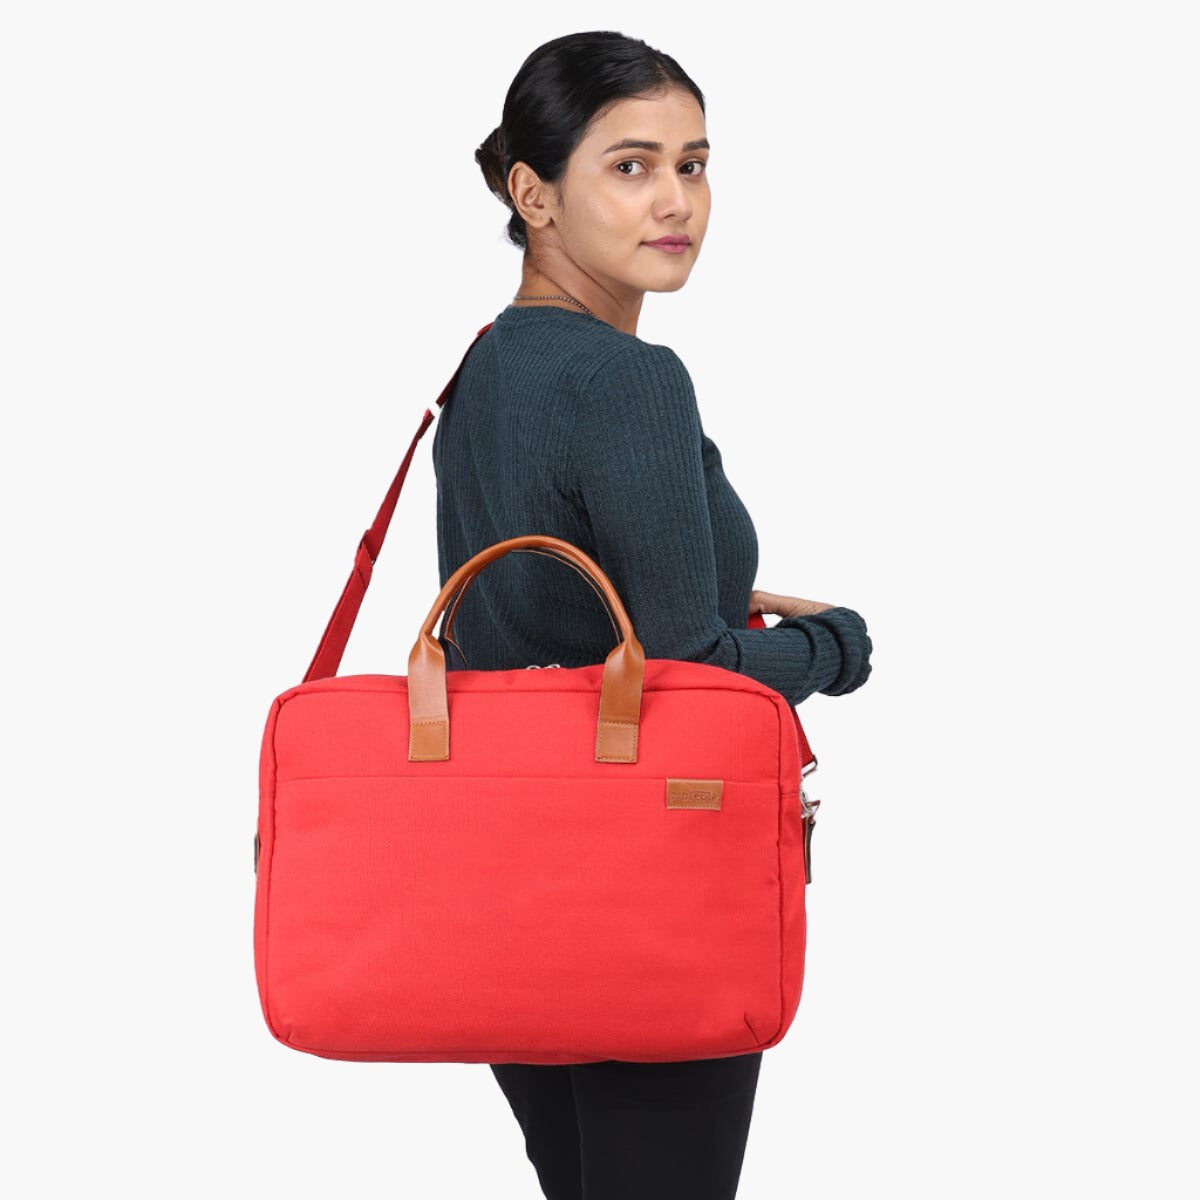 Red | Protecta The Strong Buzz Office Laptop Bag - 5